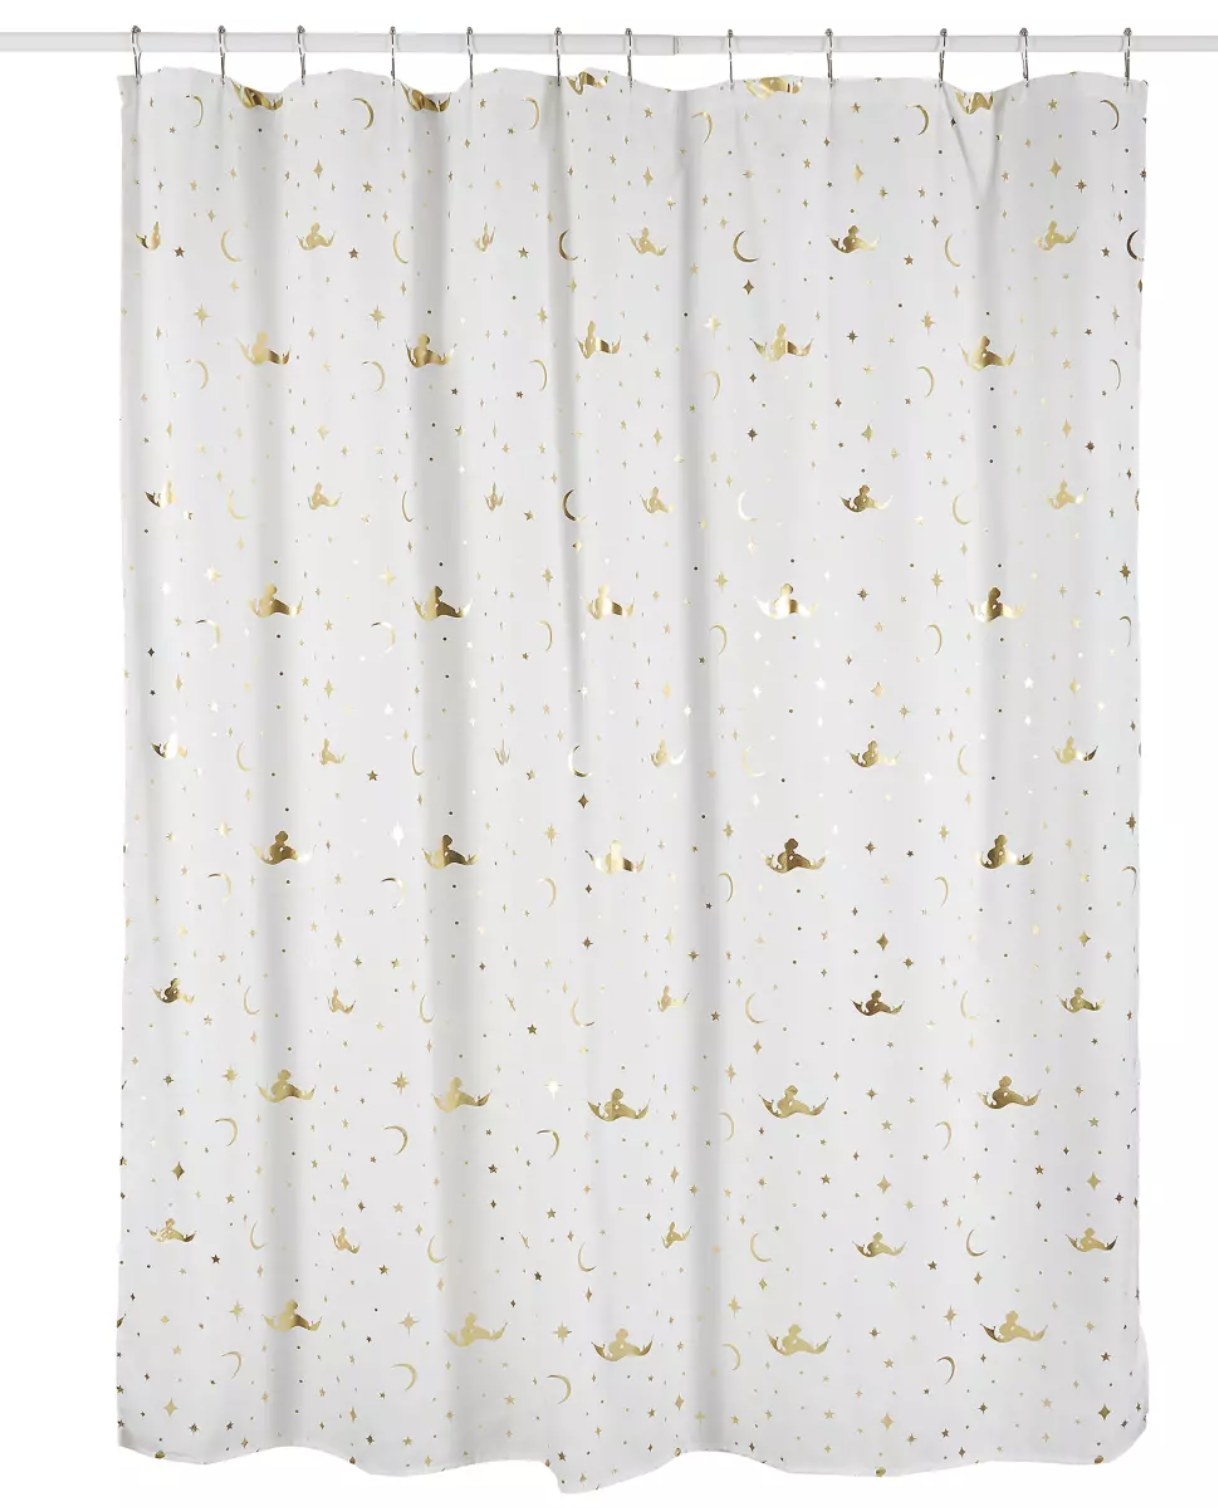 The white curtain with gold stars, moons, and magic carpet decals